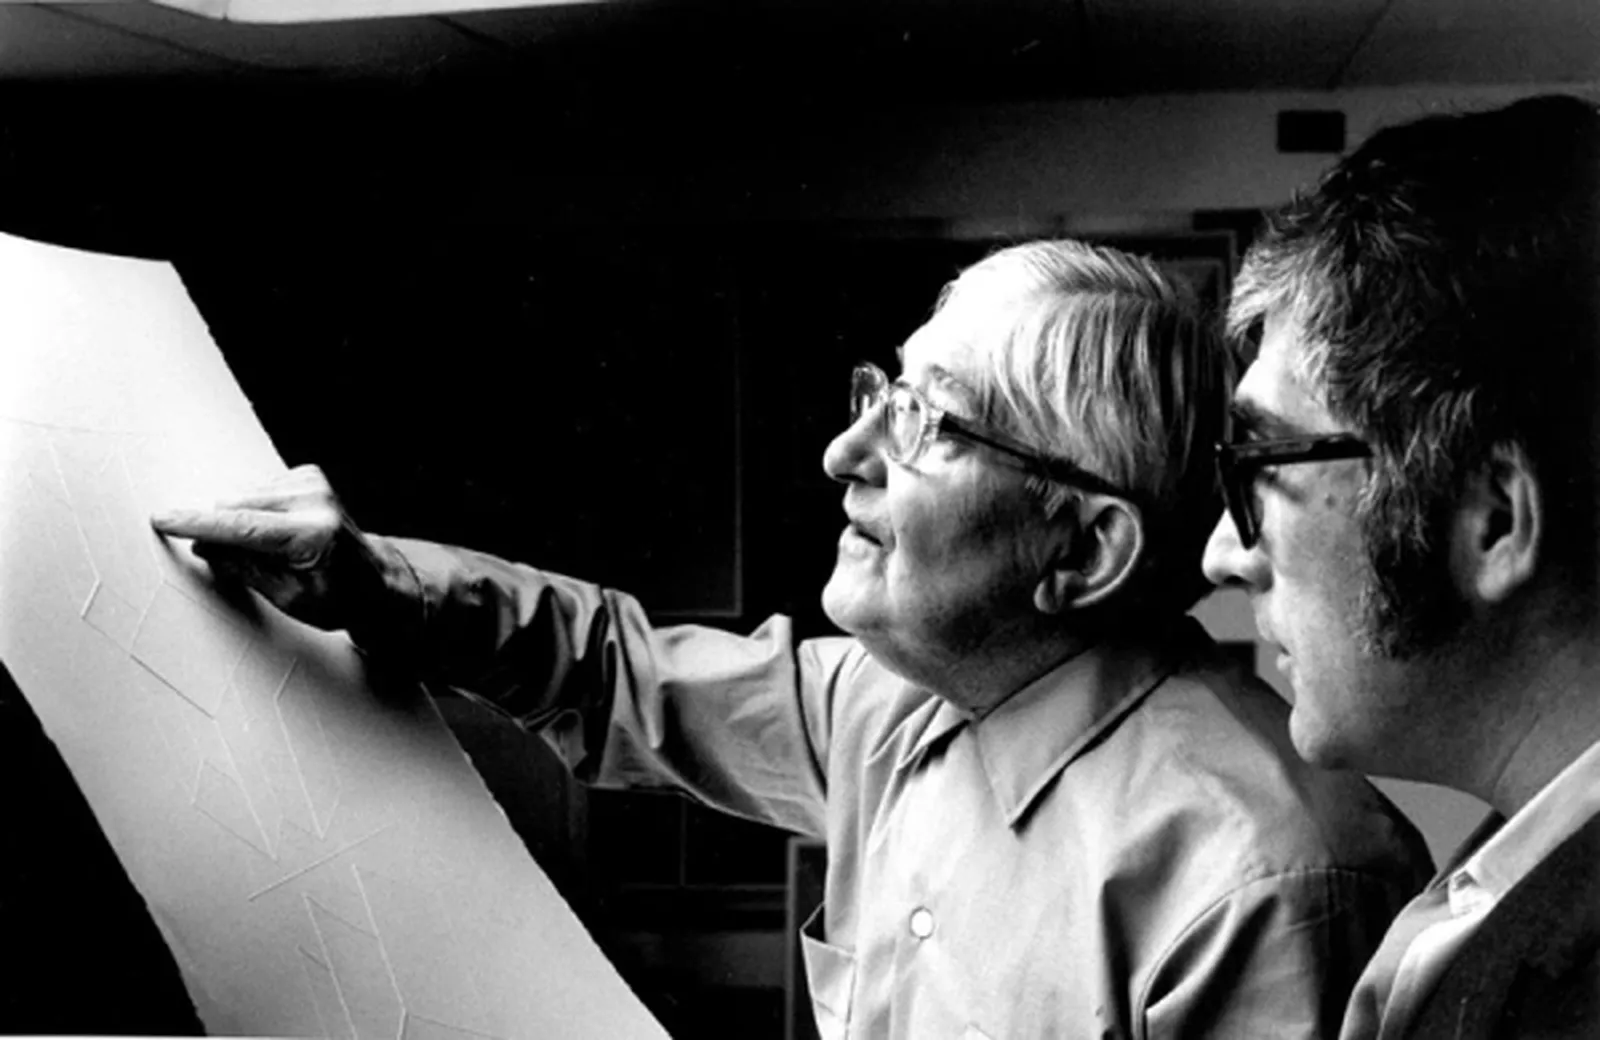 Black and white photograph of Tyler and Albers working on a print